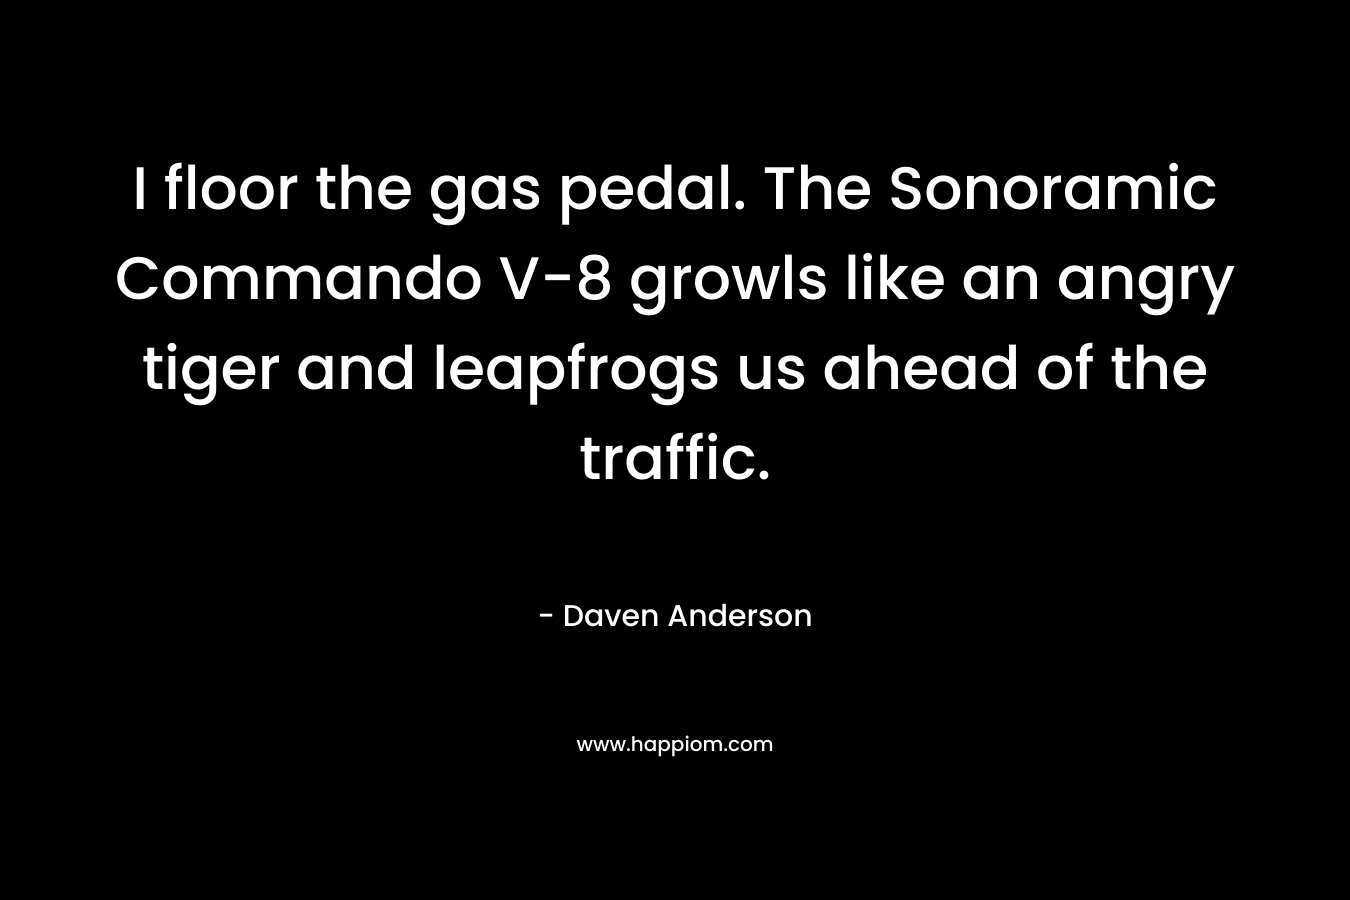 I floor the gas pedal. The Sonoramic Commando V-8 growls like an angry tiger and leapfrogs us ahead of the traffic. – Daven Anderson